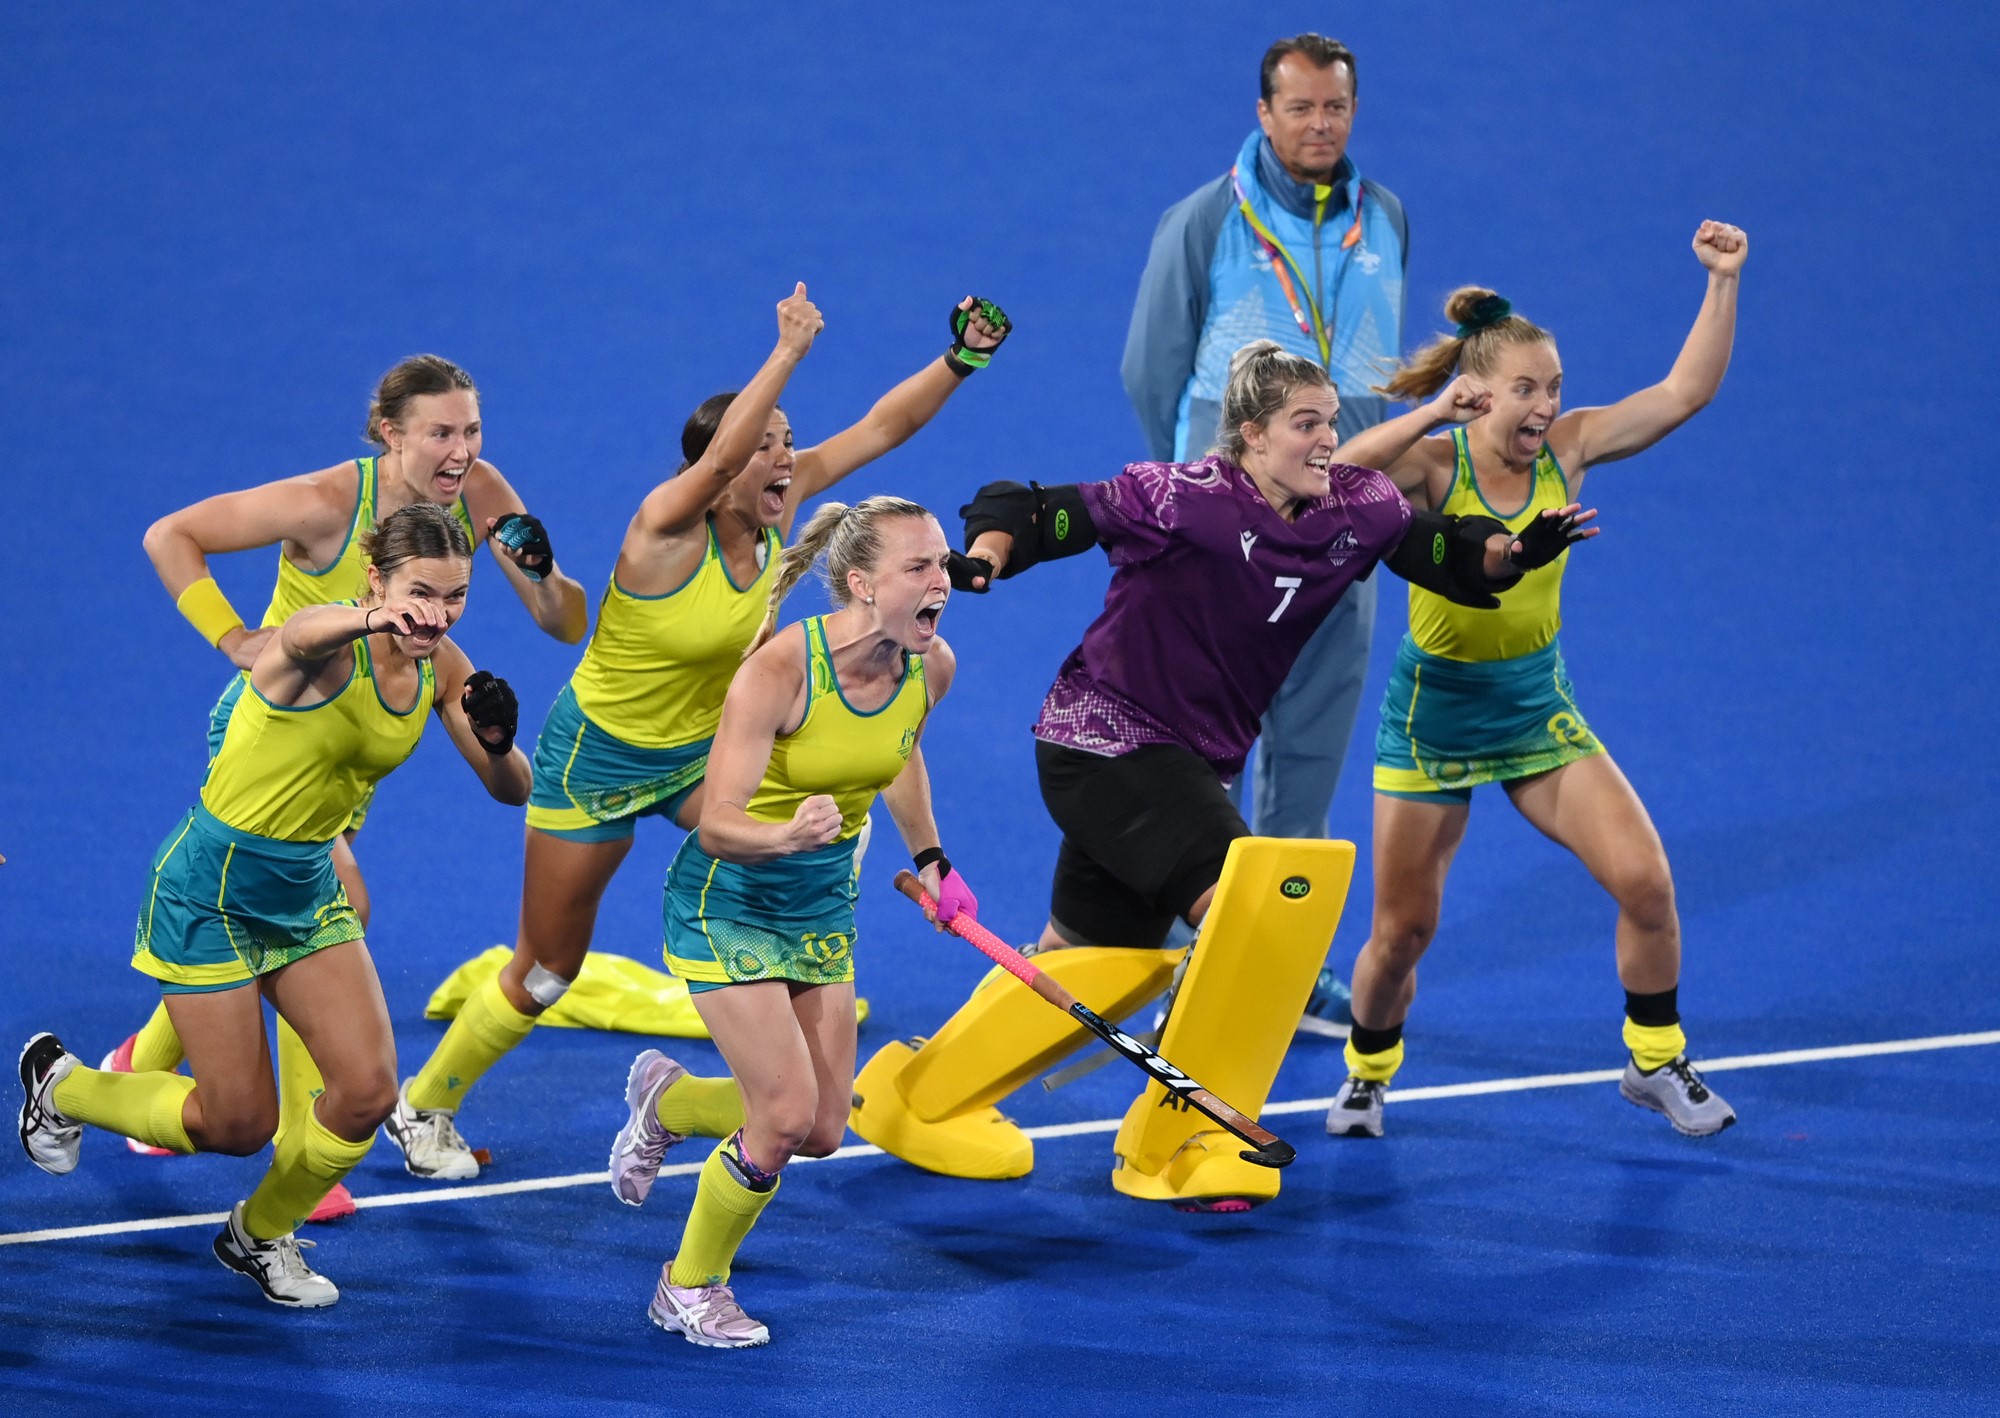 Hockeyroos players shout after winning the Commonwealth Games semi-final against India.